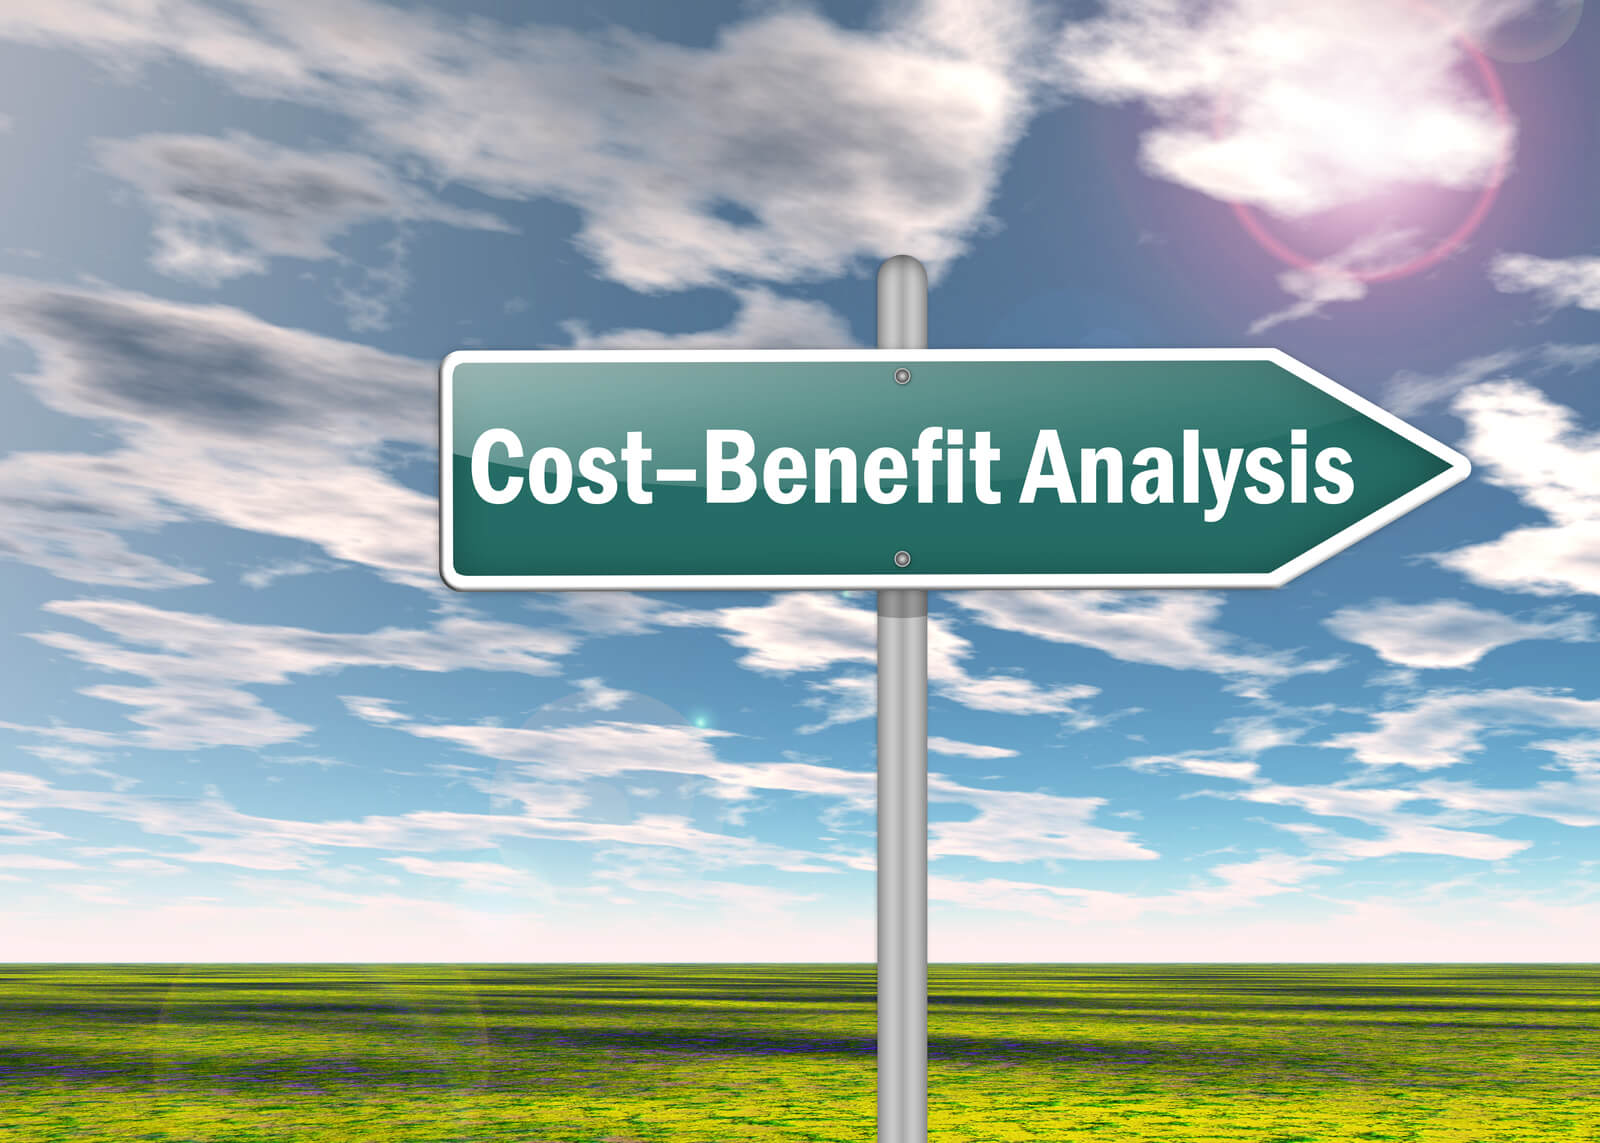 COST AND BENEFIT ANALYSIS